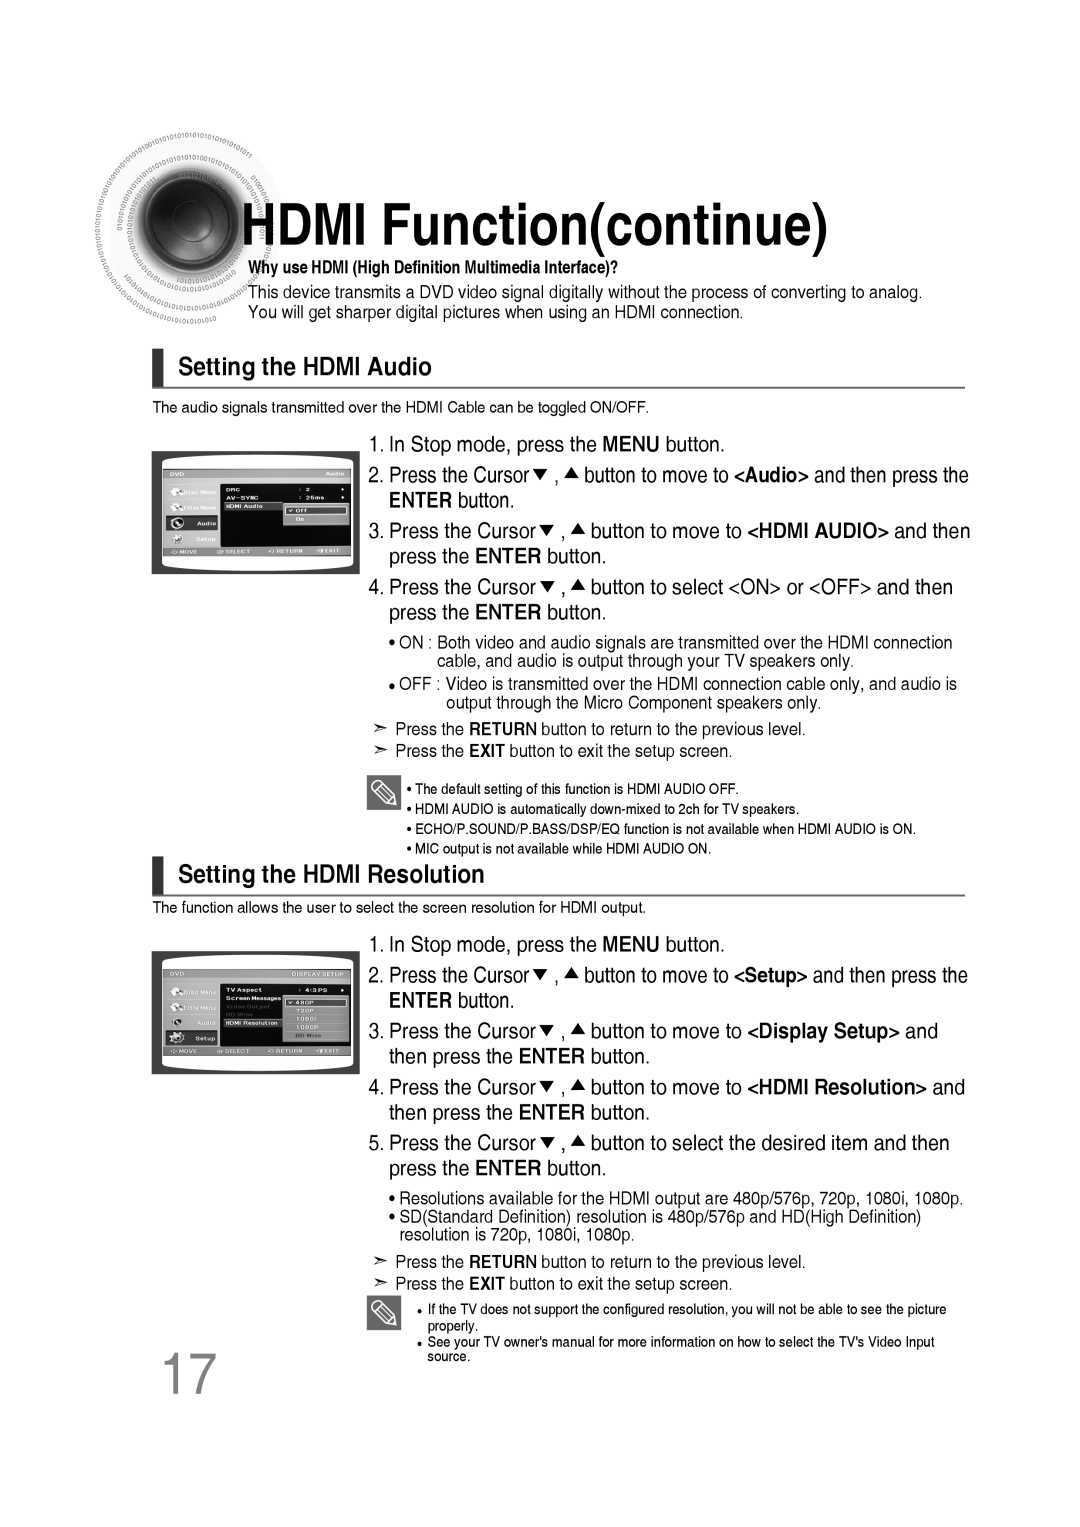 Samsung AH68-02272Y, MM-C550D, MM-C530D, MM-C430D HDMI Functioncontinue, Setting the HDMI Audio, Setting the HDMI Resolution 